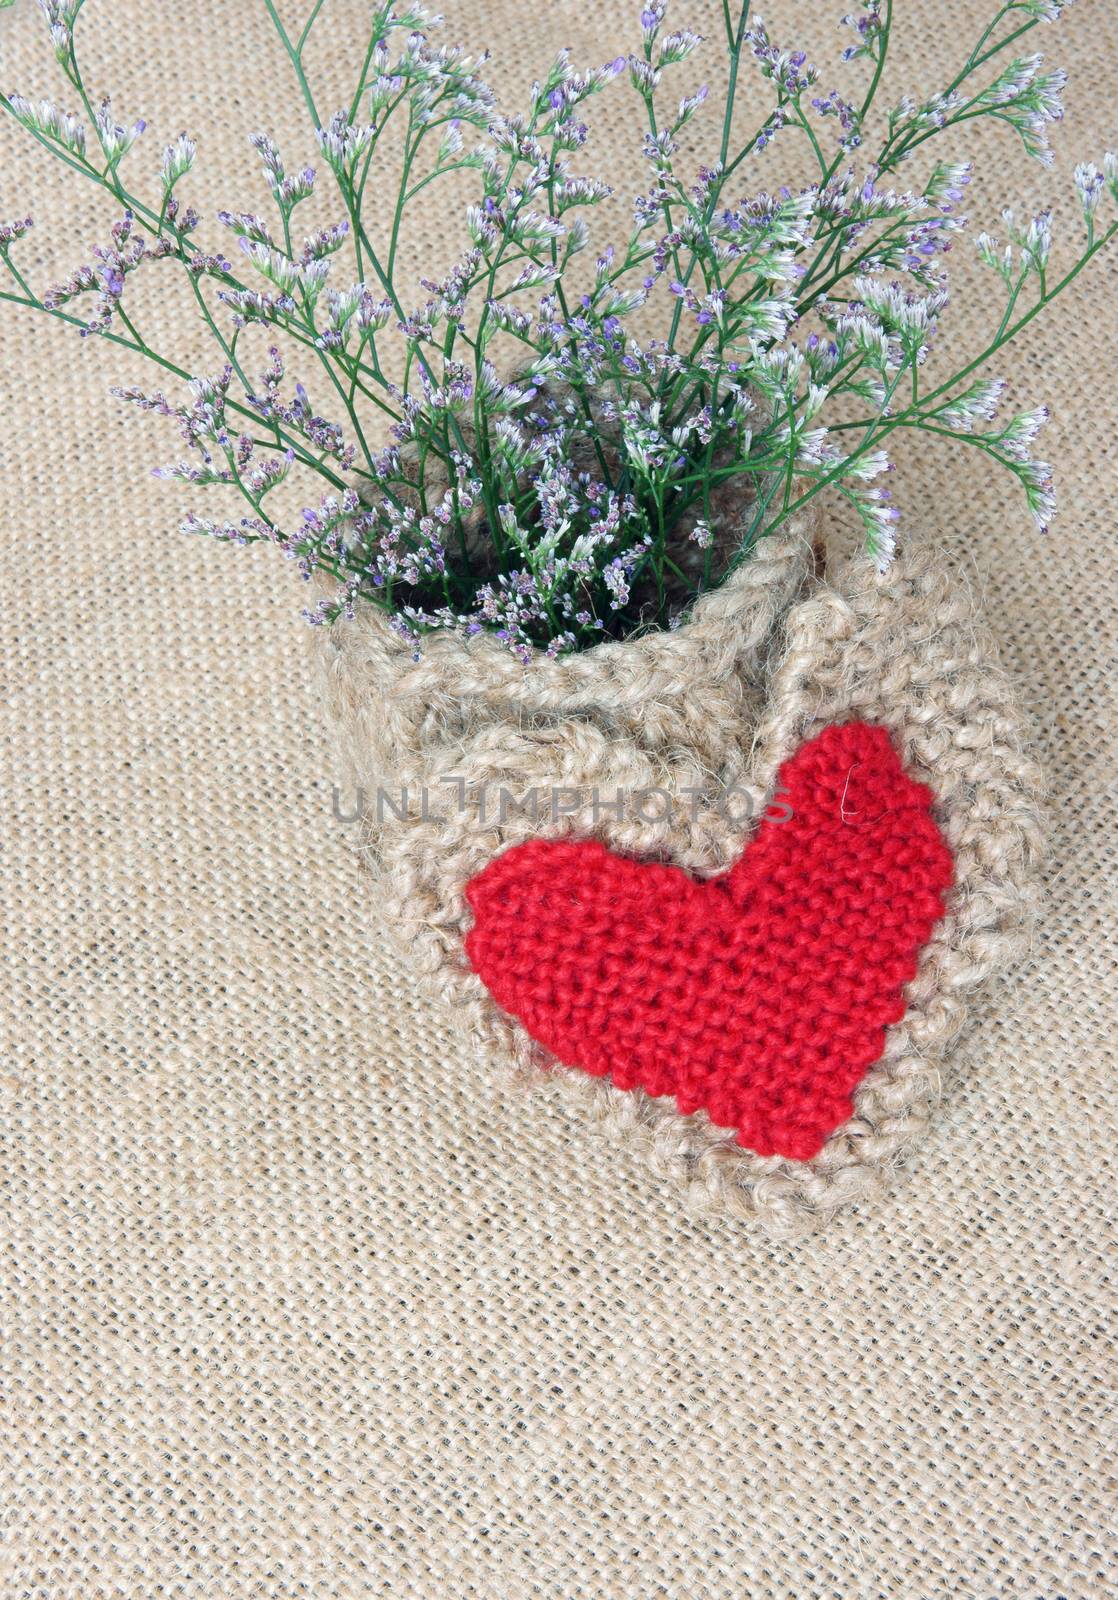 decor, handmade, flower pot, heart, vintage style by xuanhuongho